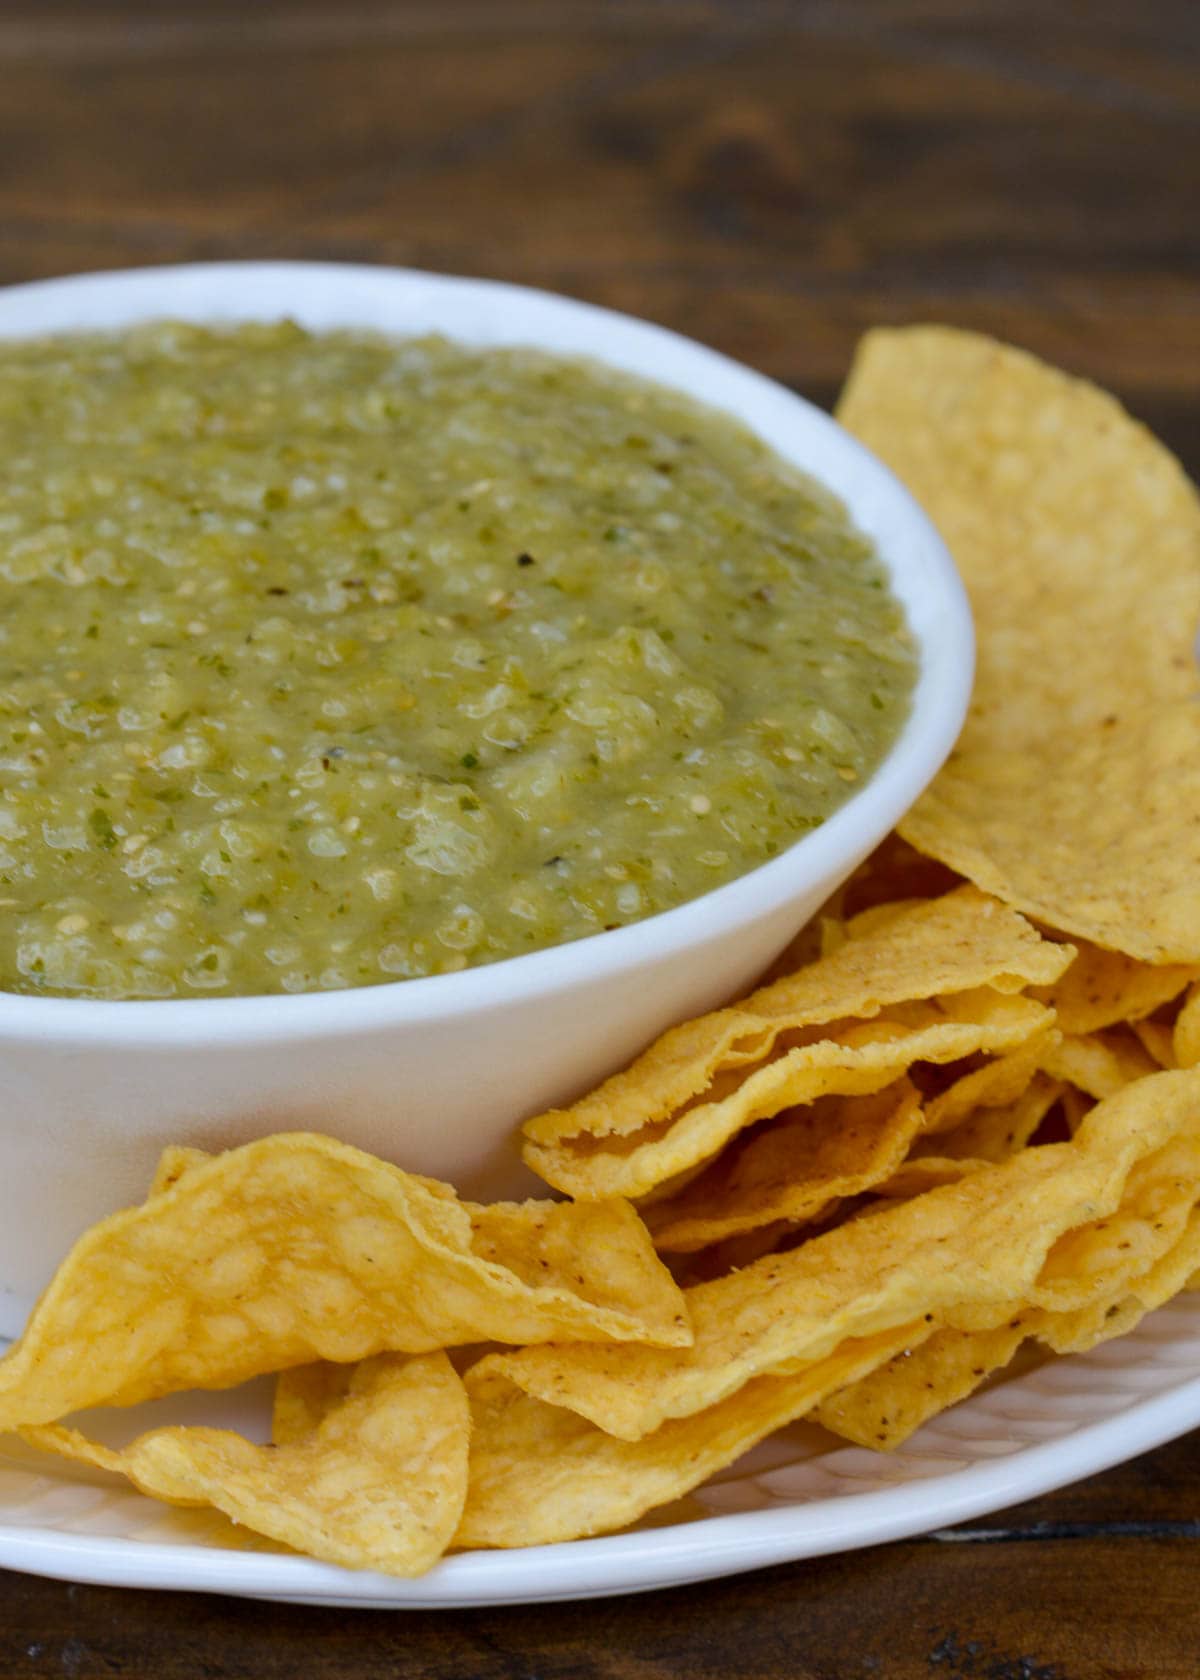 tomatillo salsa in a bowl with a side of tortilla chips